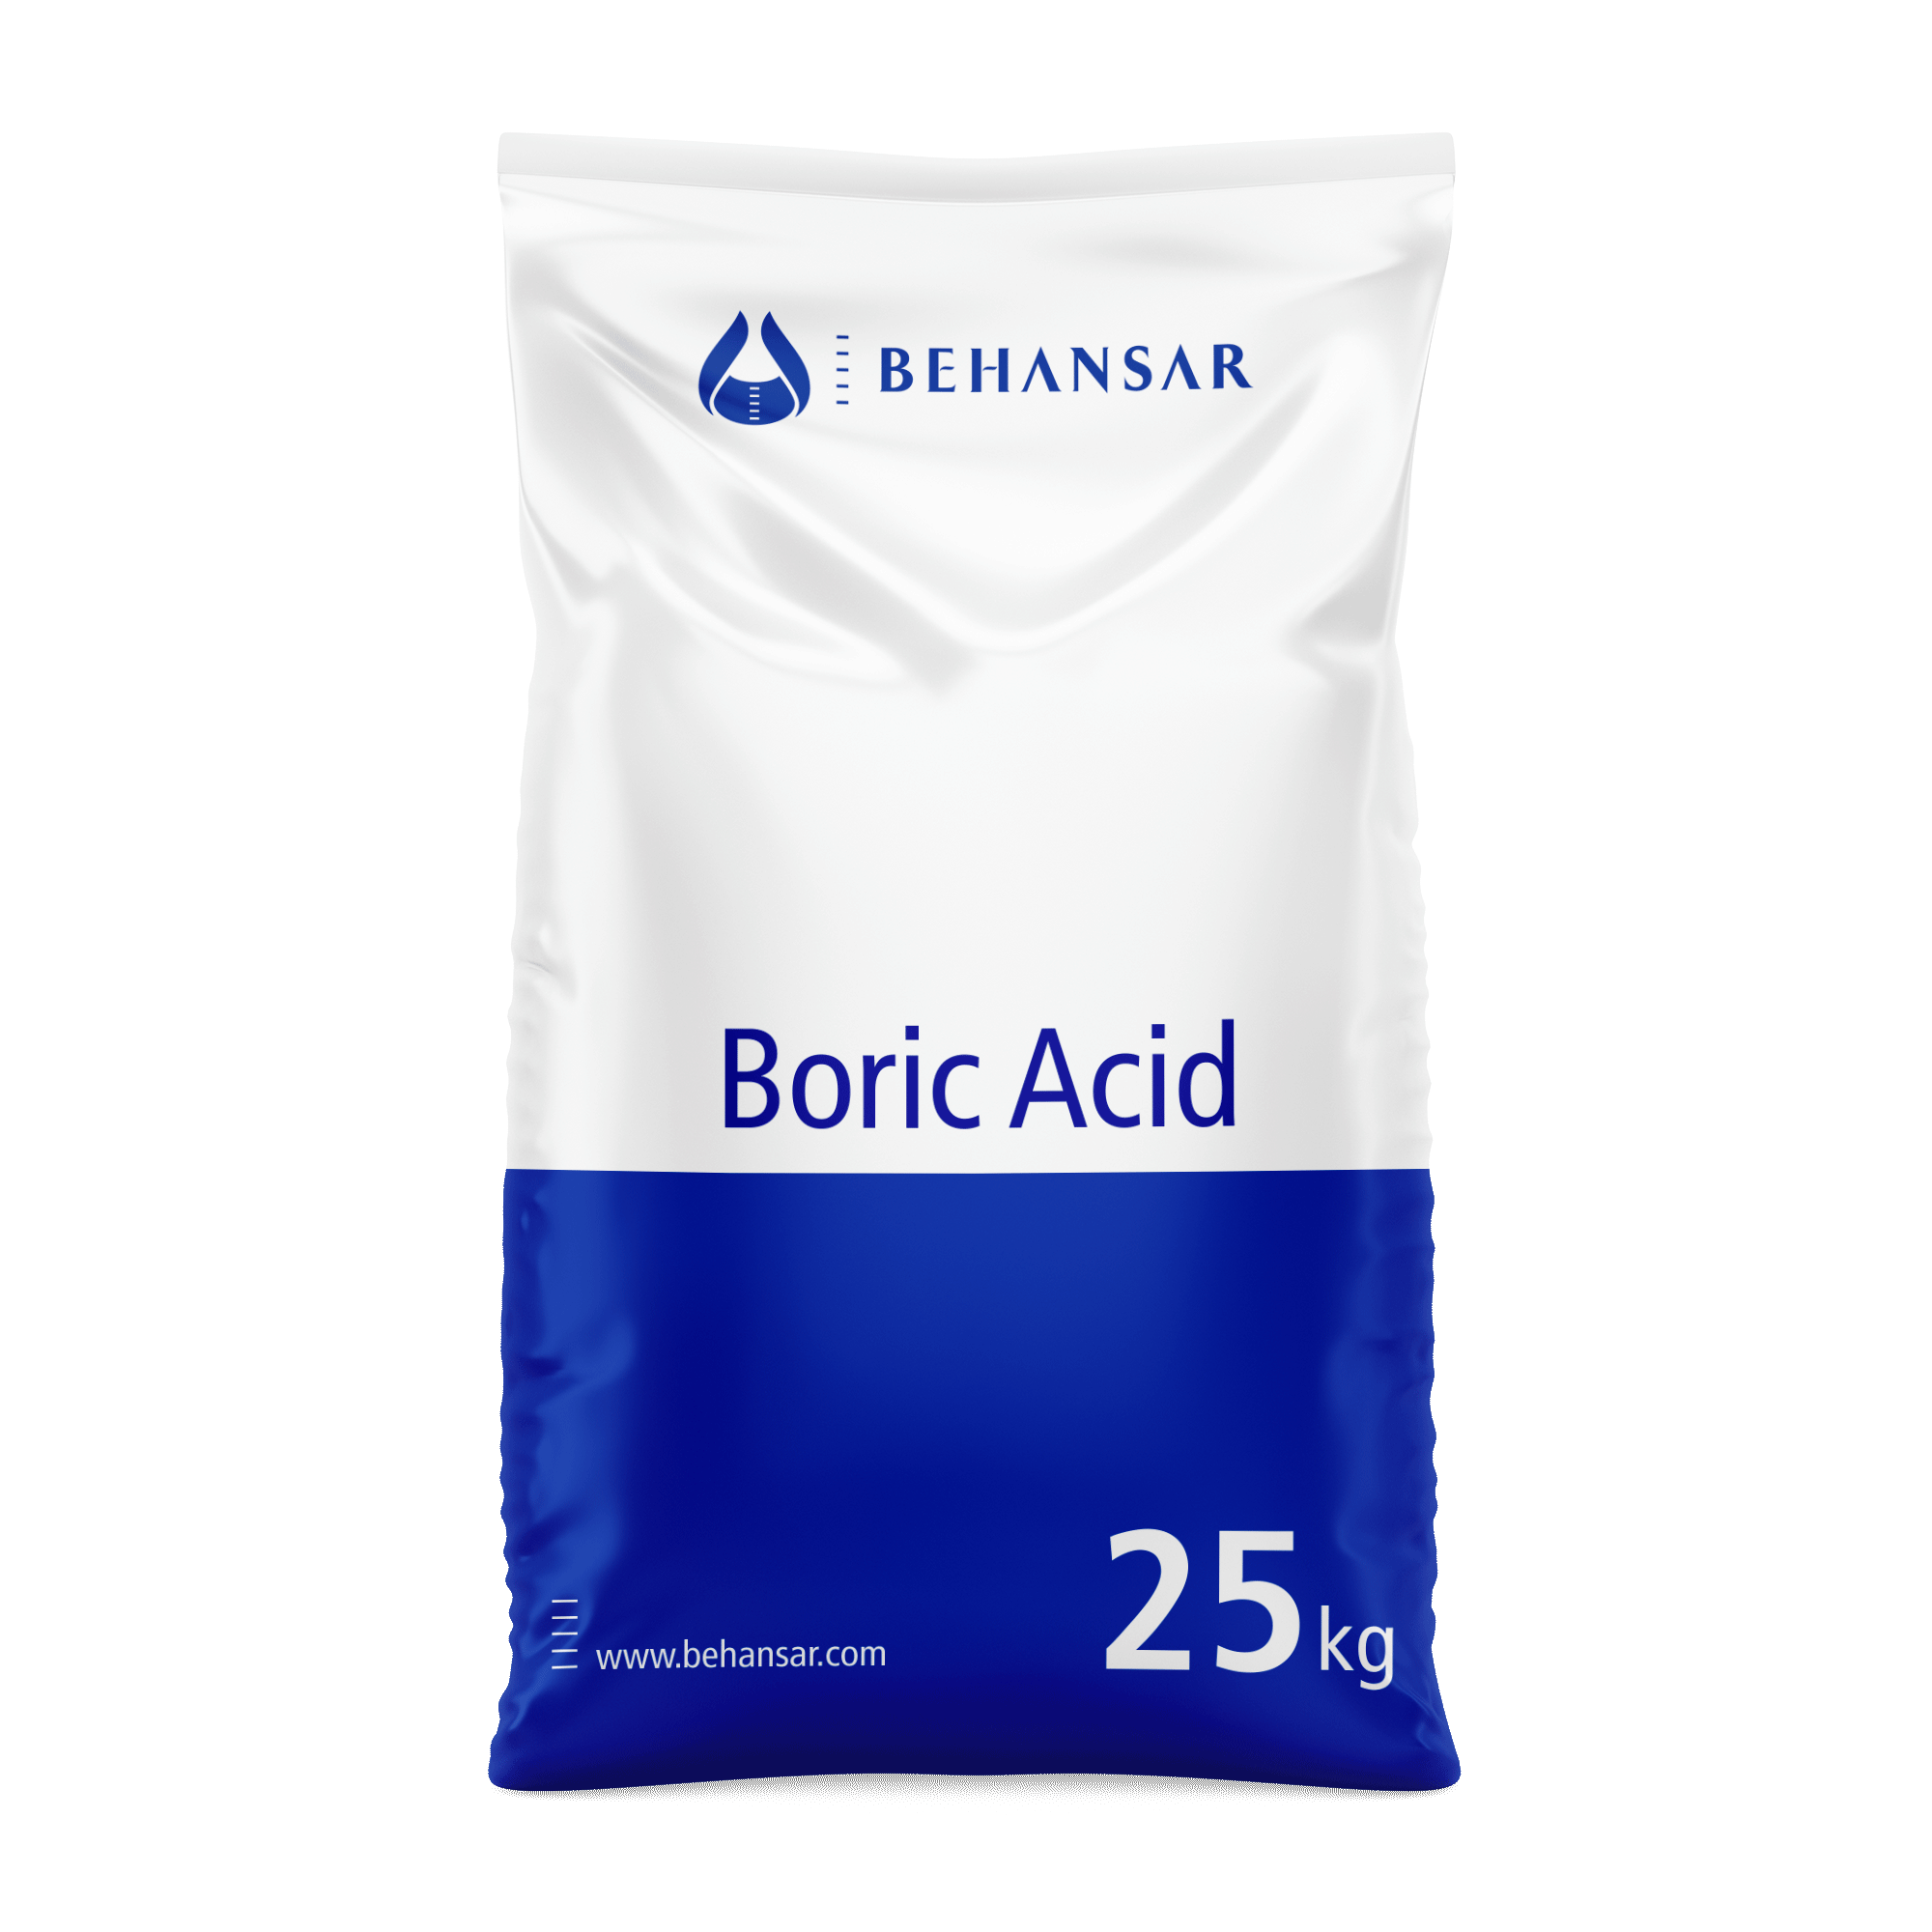 Boric Acid is one of the products of Behansar Co